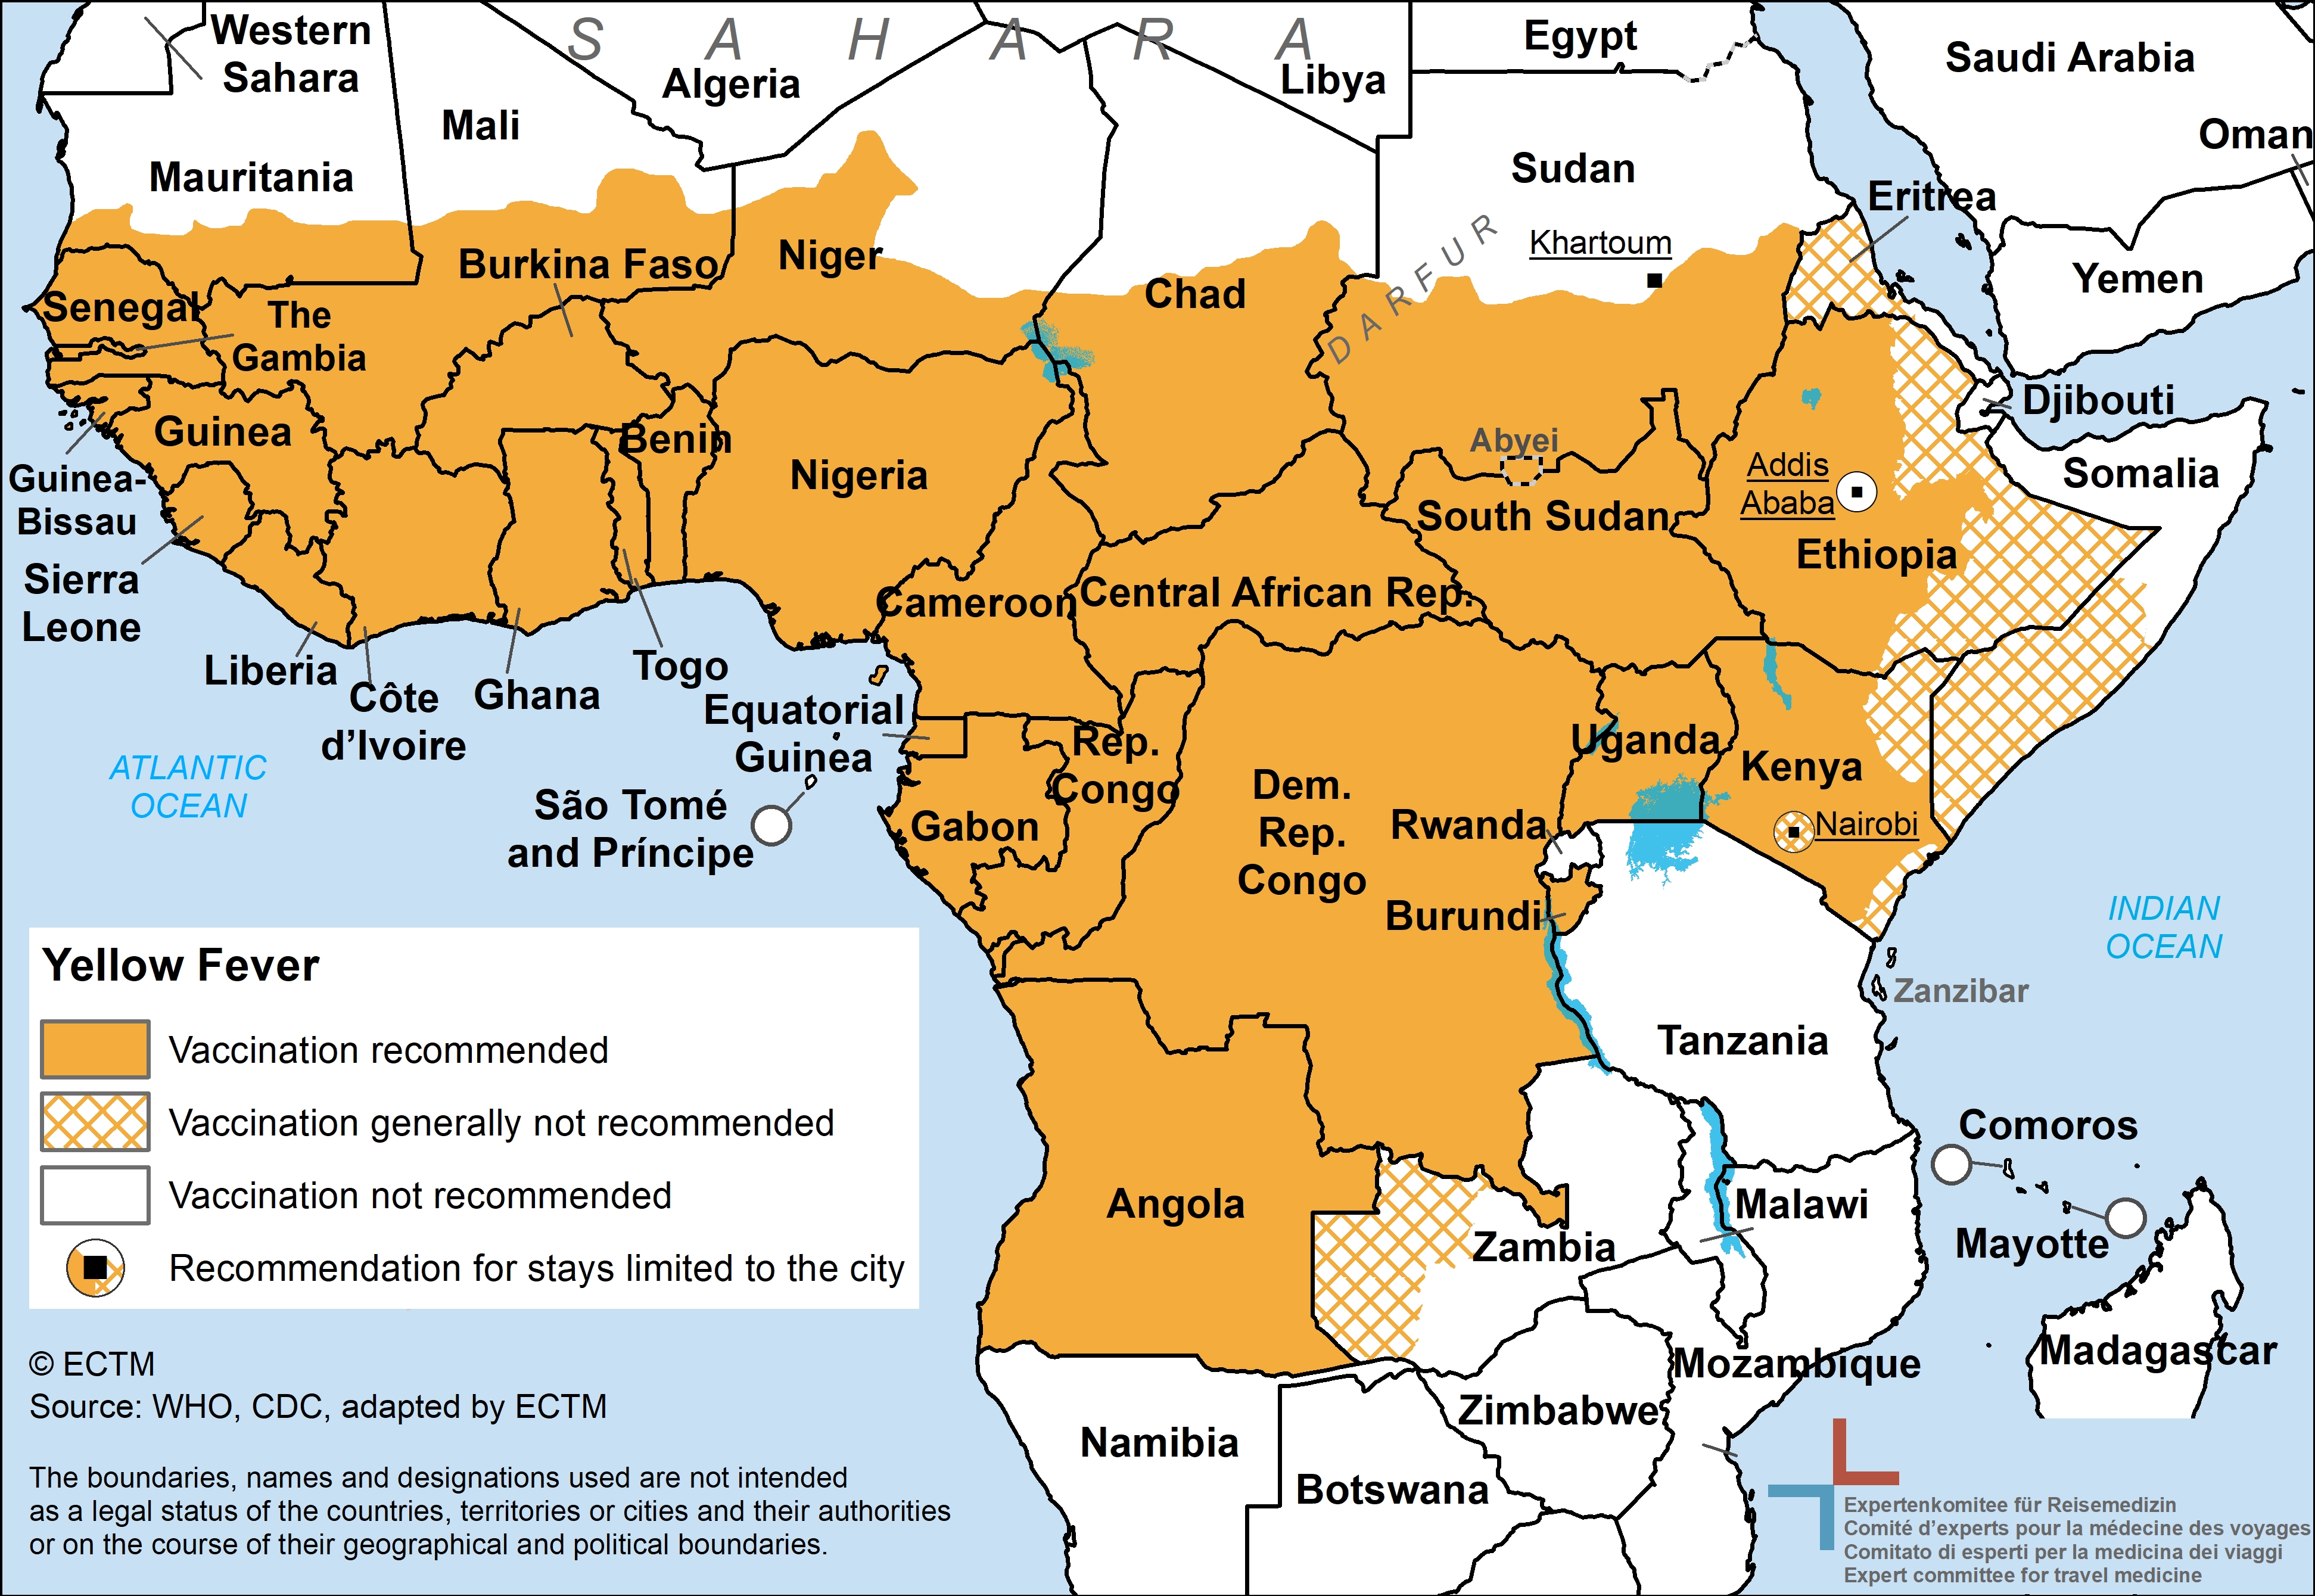 Yellow_fever_vaccination_map_AFRICA.jpg